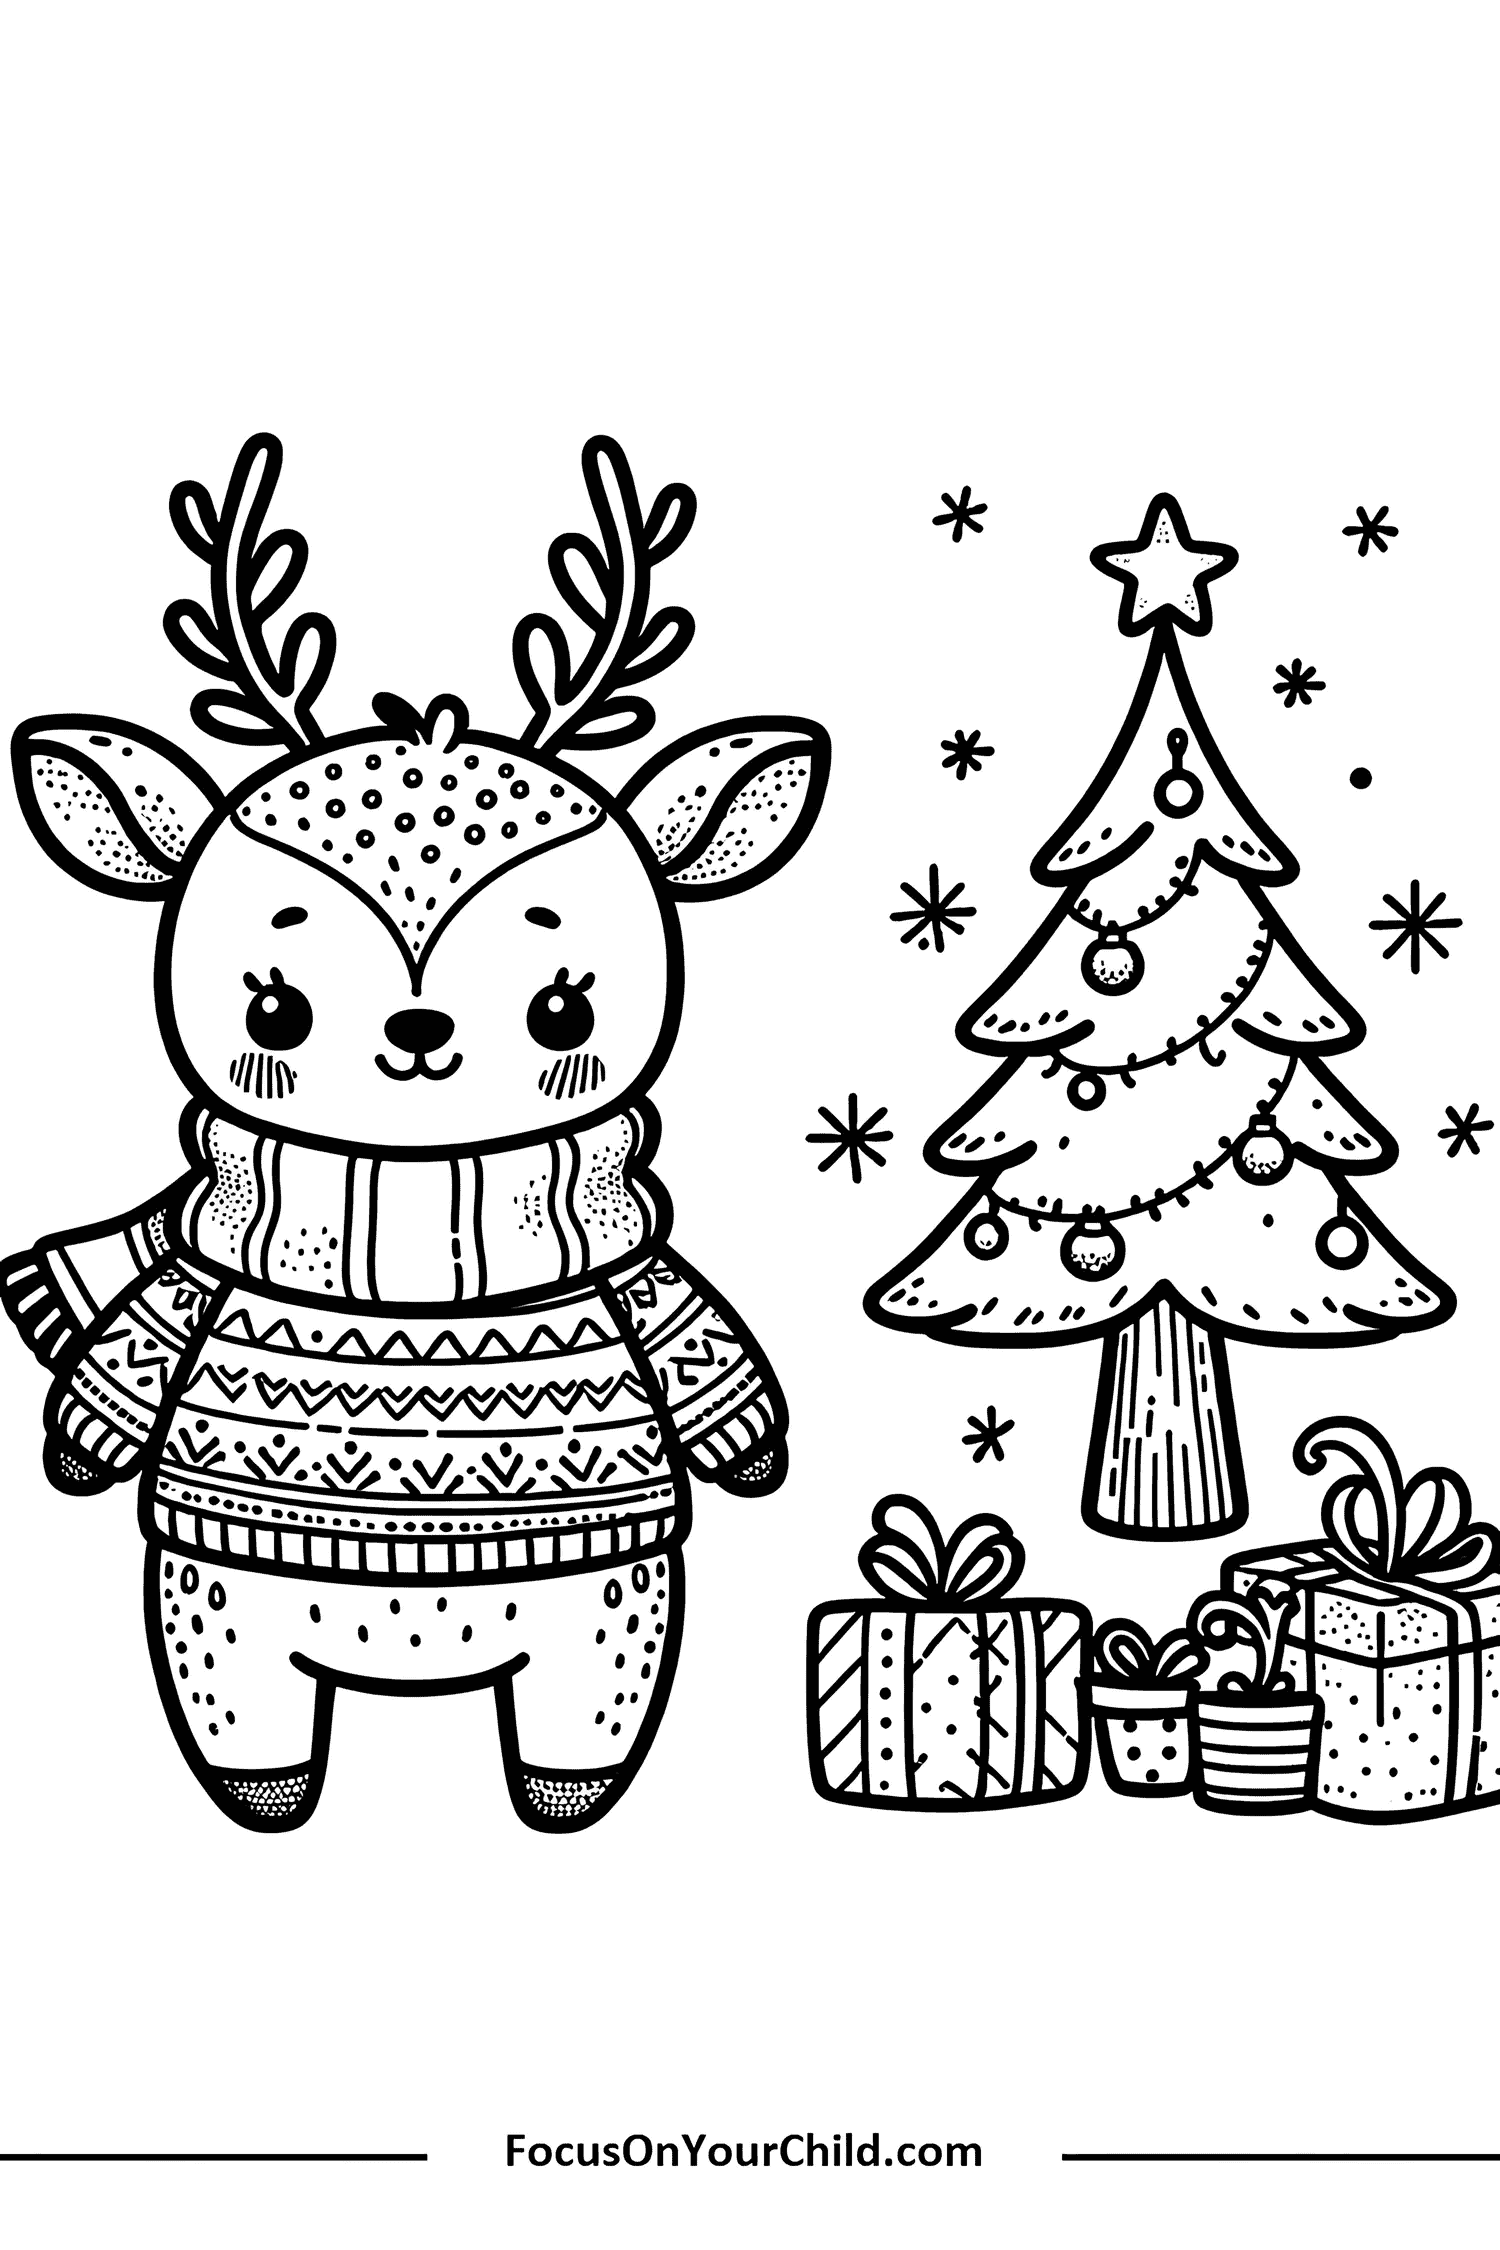 Christmas reindeer and tree coloring page for kids from FocusOnYourChild.com.